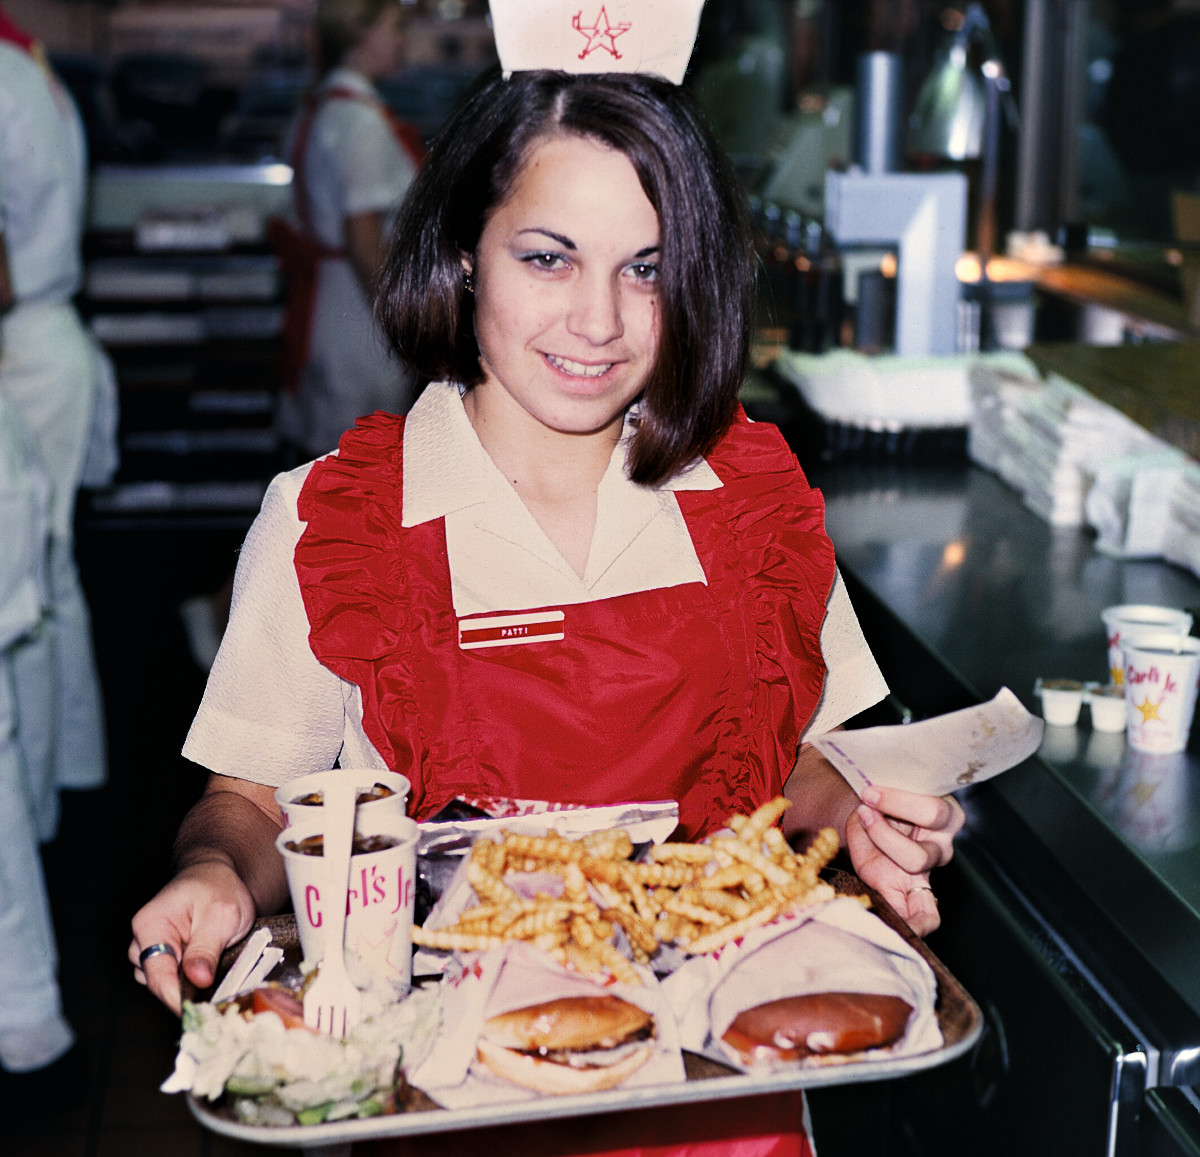 A waitress at Carl's Jr. as reproduced in The World is Your Burger